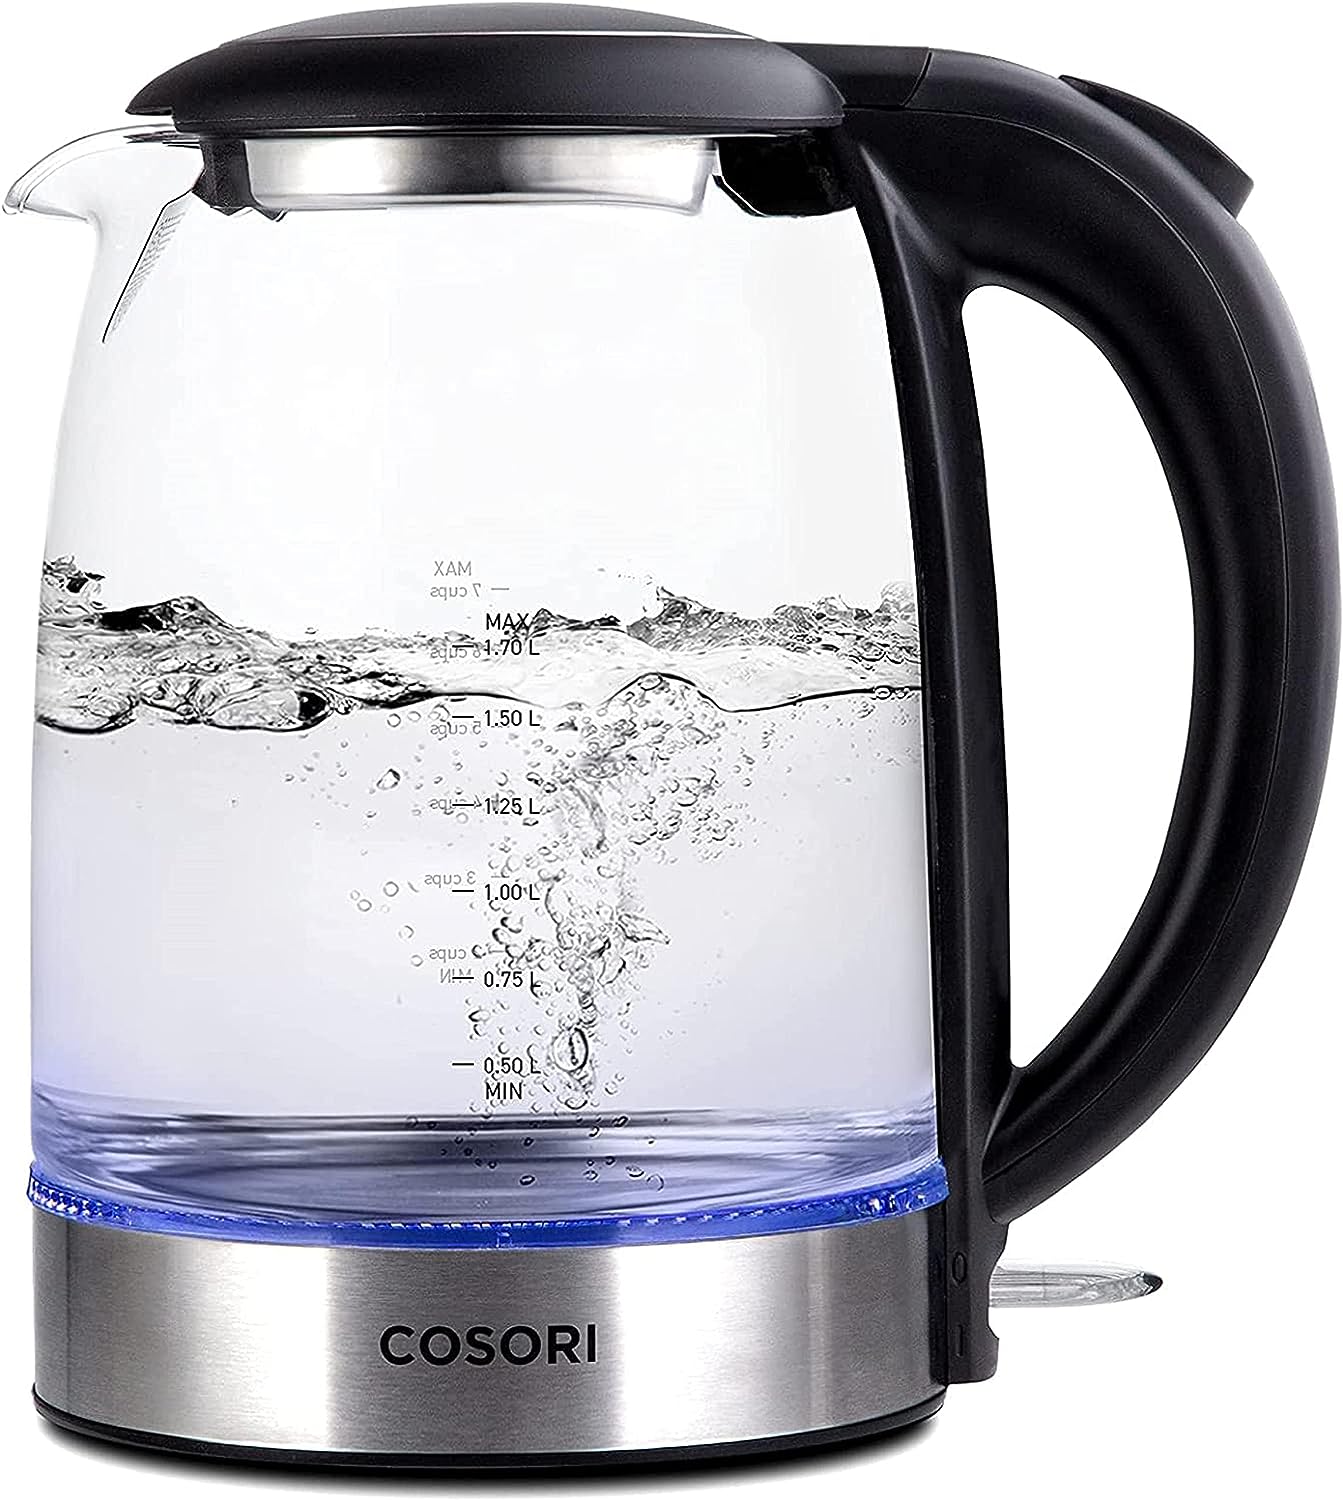 COSORI Electric Tea Kettle for Boiling Water, Stainless Steel Filter, 1.7L/1500W, Hot Water Boiler, Wide OpeningAutomatic Shut Off, BPA-Free, Black